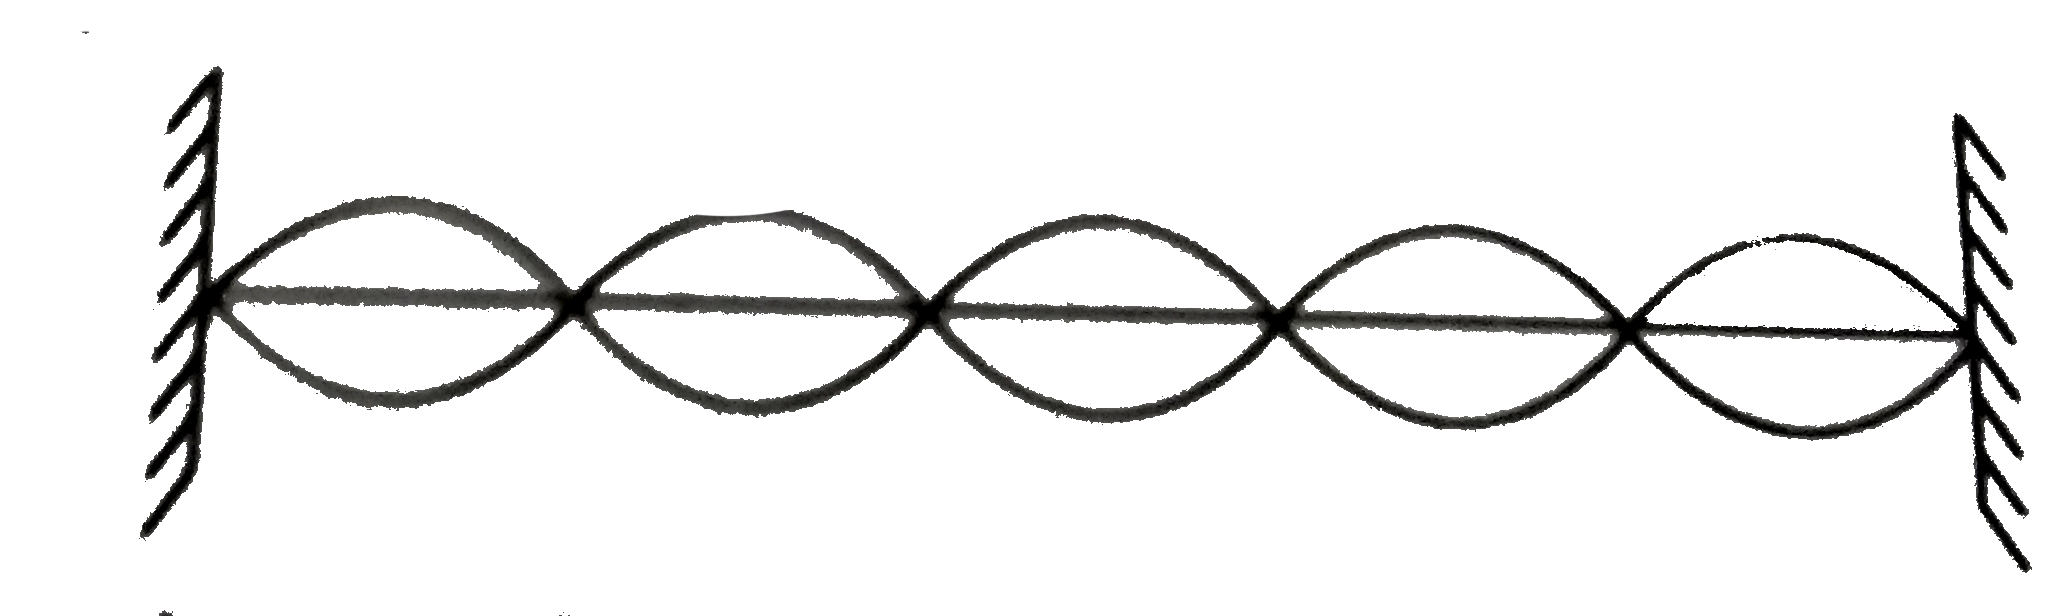 A string fixed at its both ends vibrates in 5 loops as shown in the figure. The number of nodes and antinodes respectively